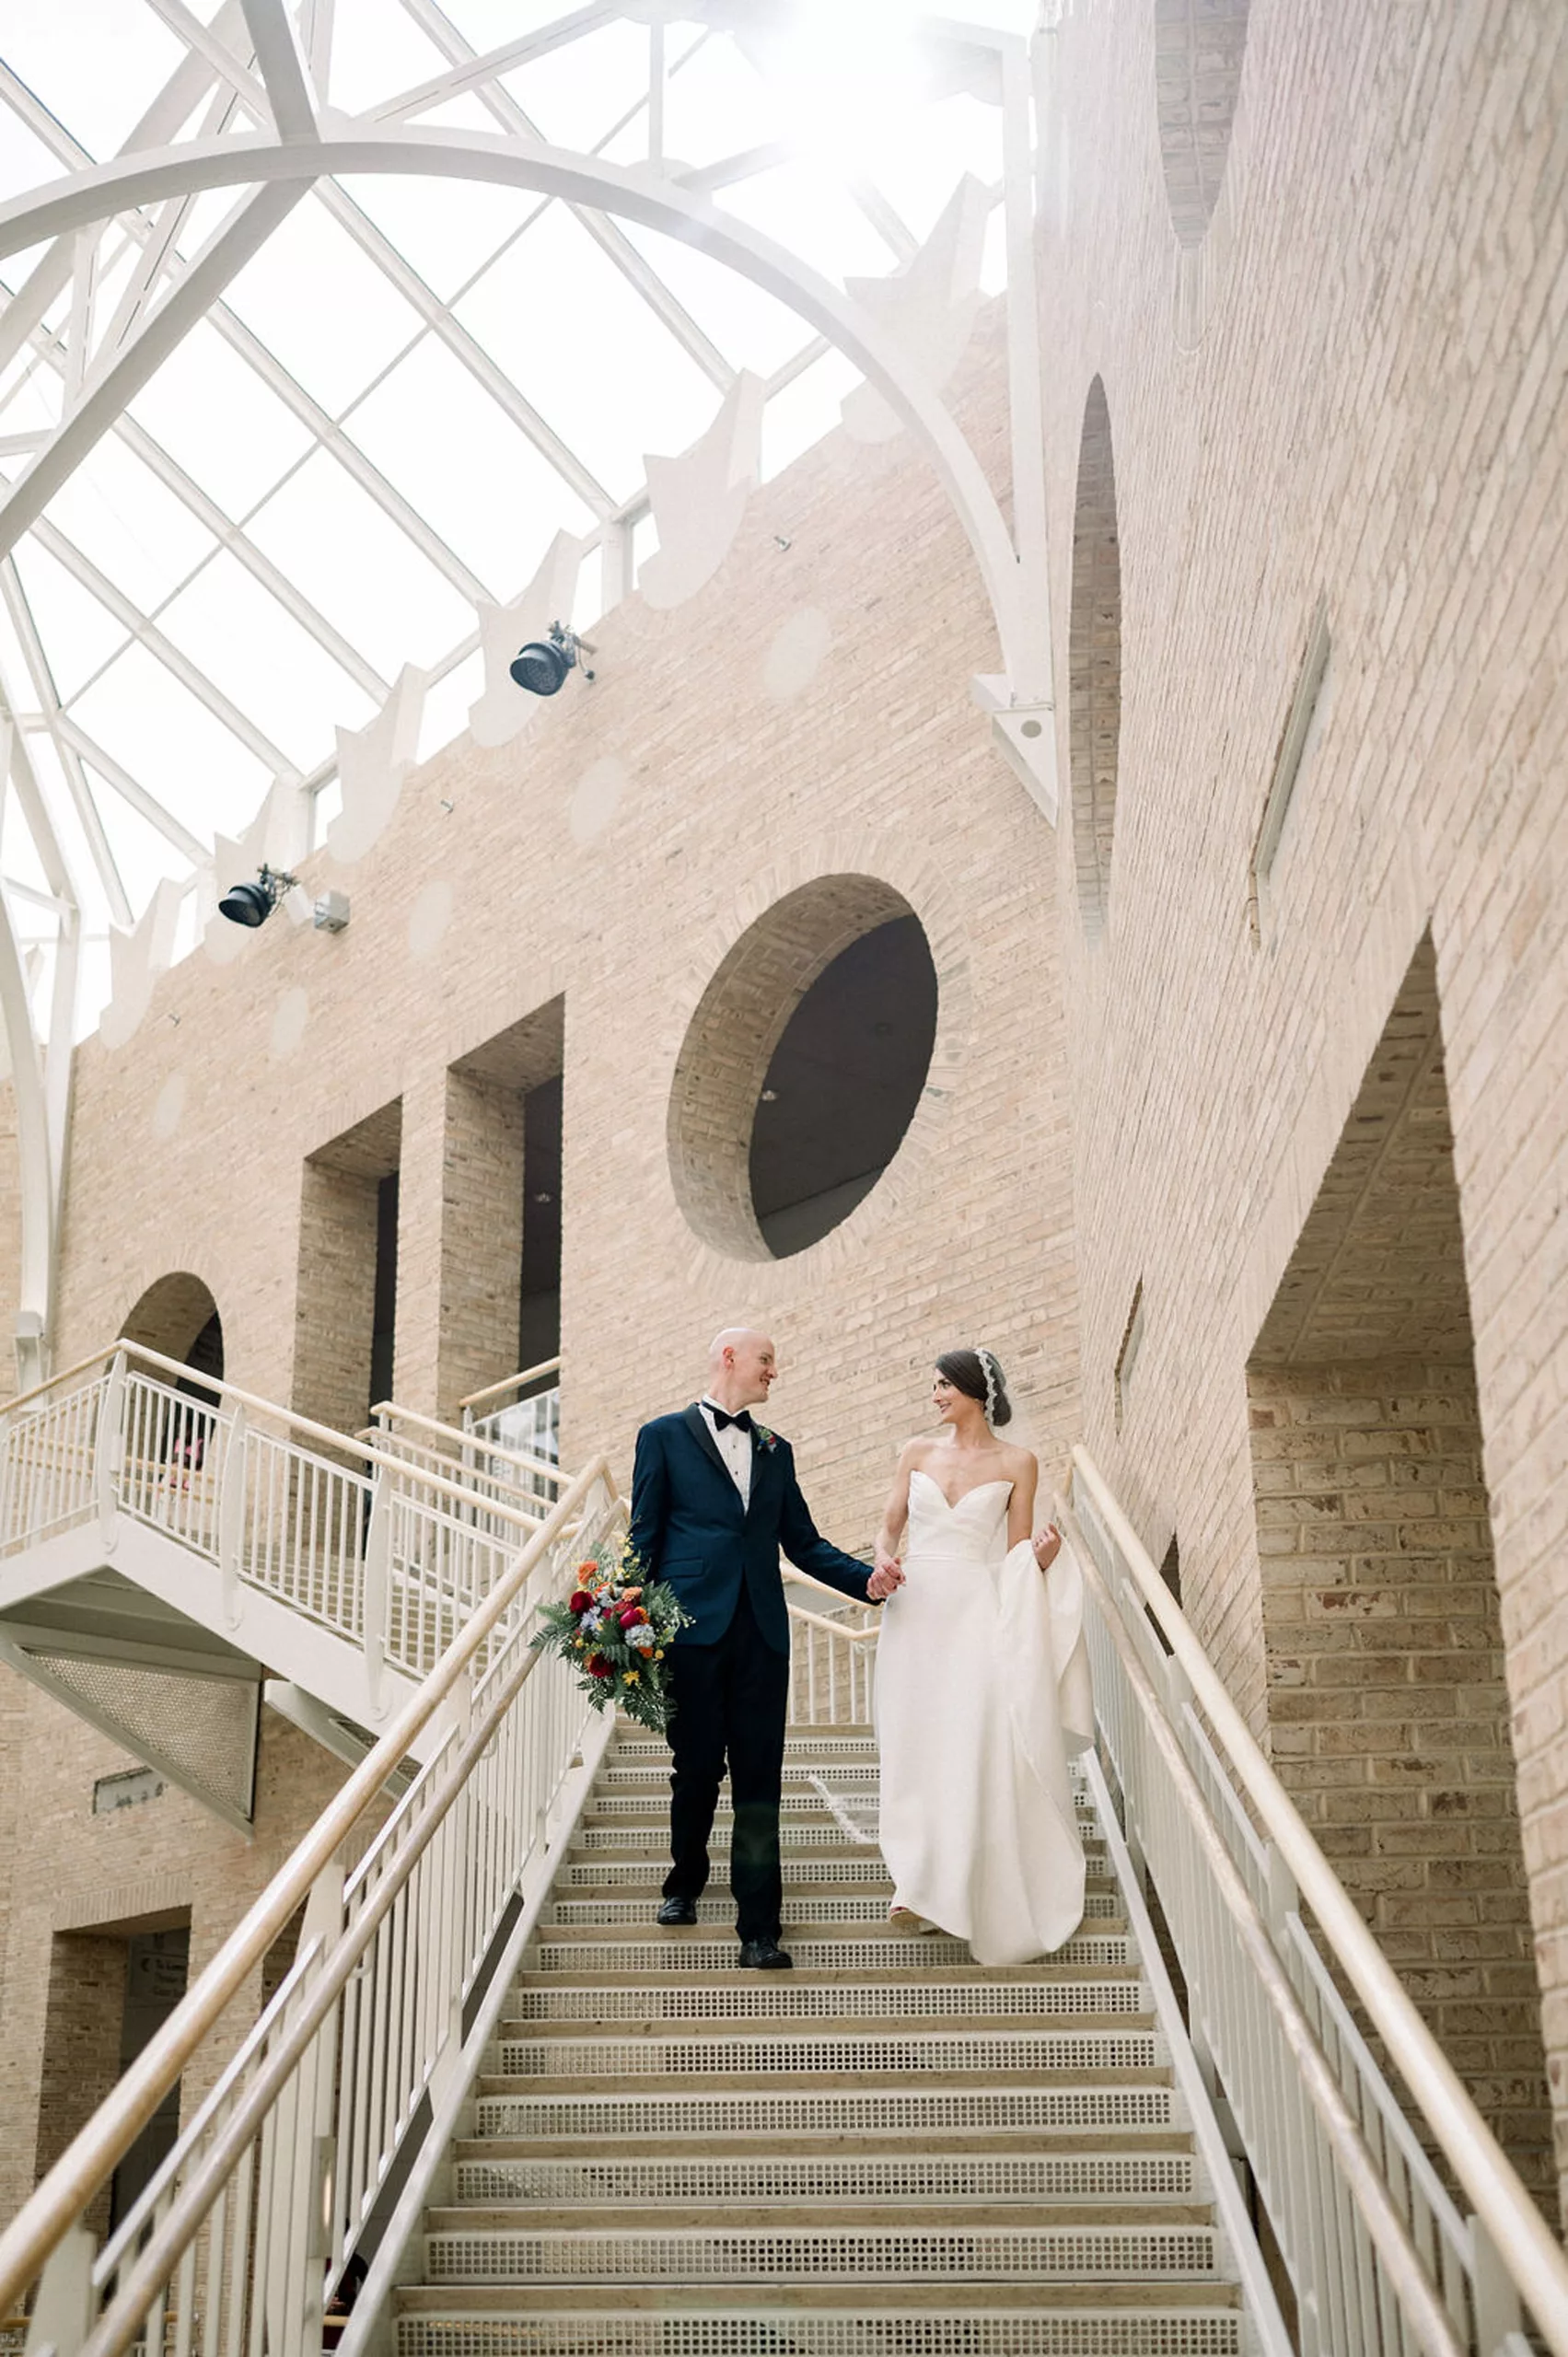 Newlyweds walk down a large museum staircase holding hands